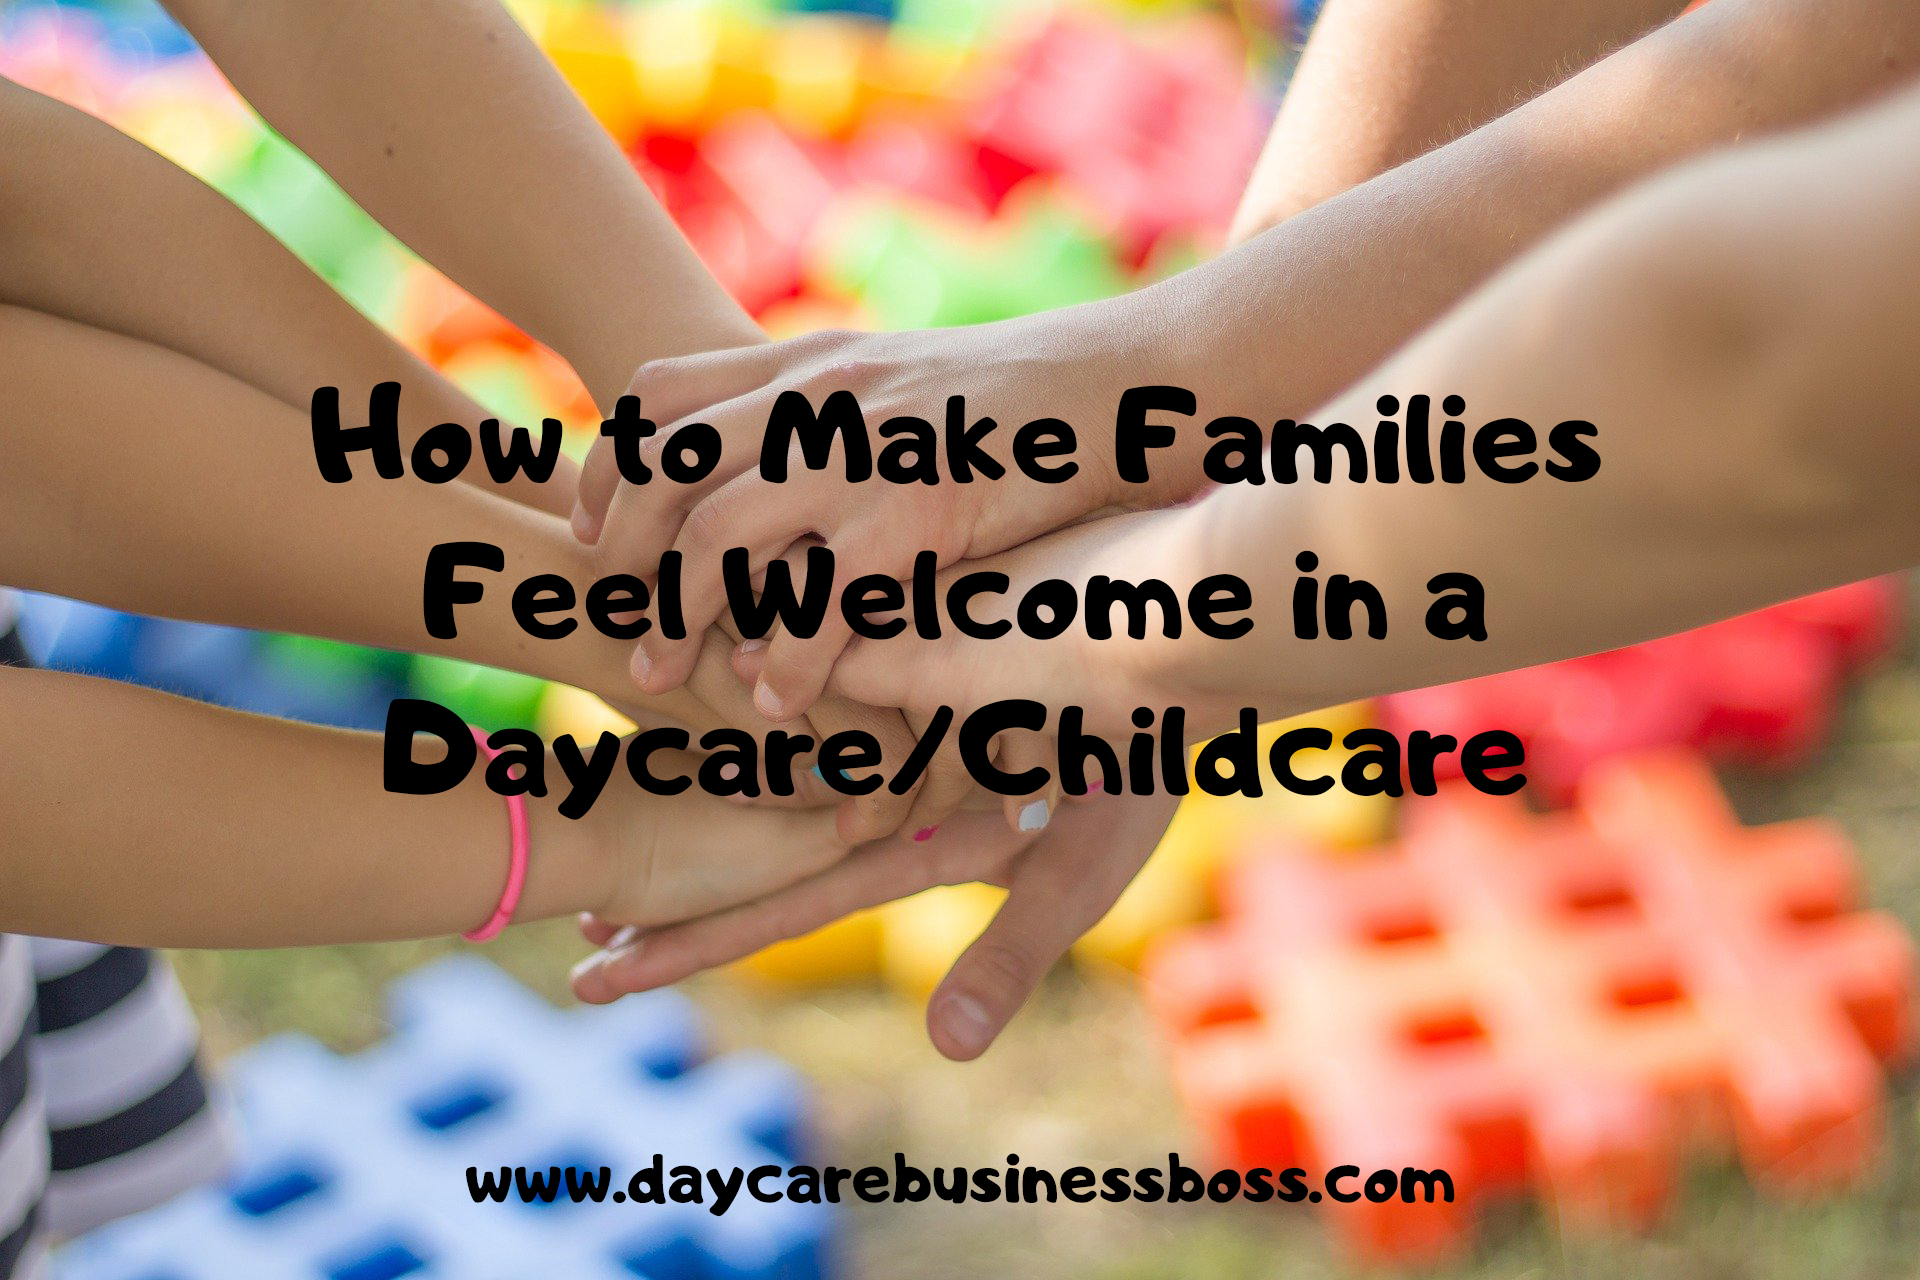 How To Make Families Feel Welcome in A Daycare/Childcare.